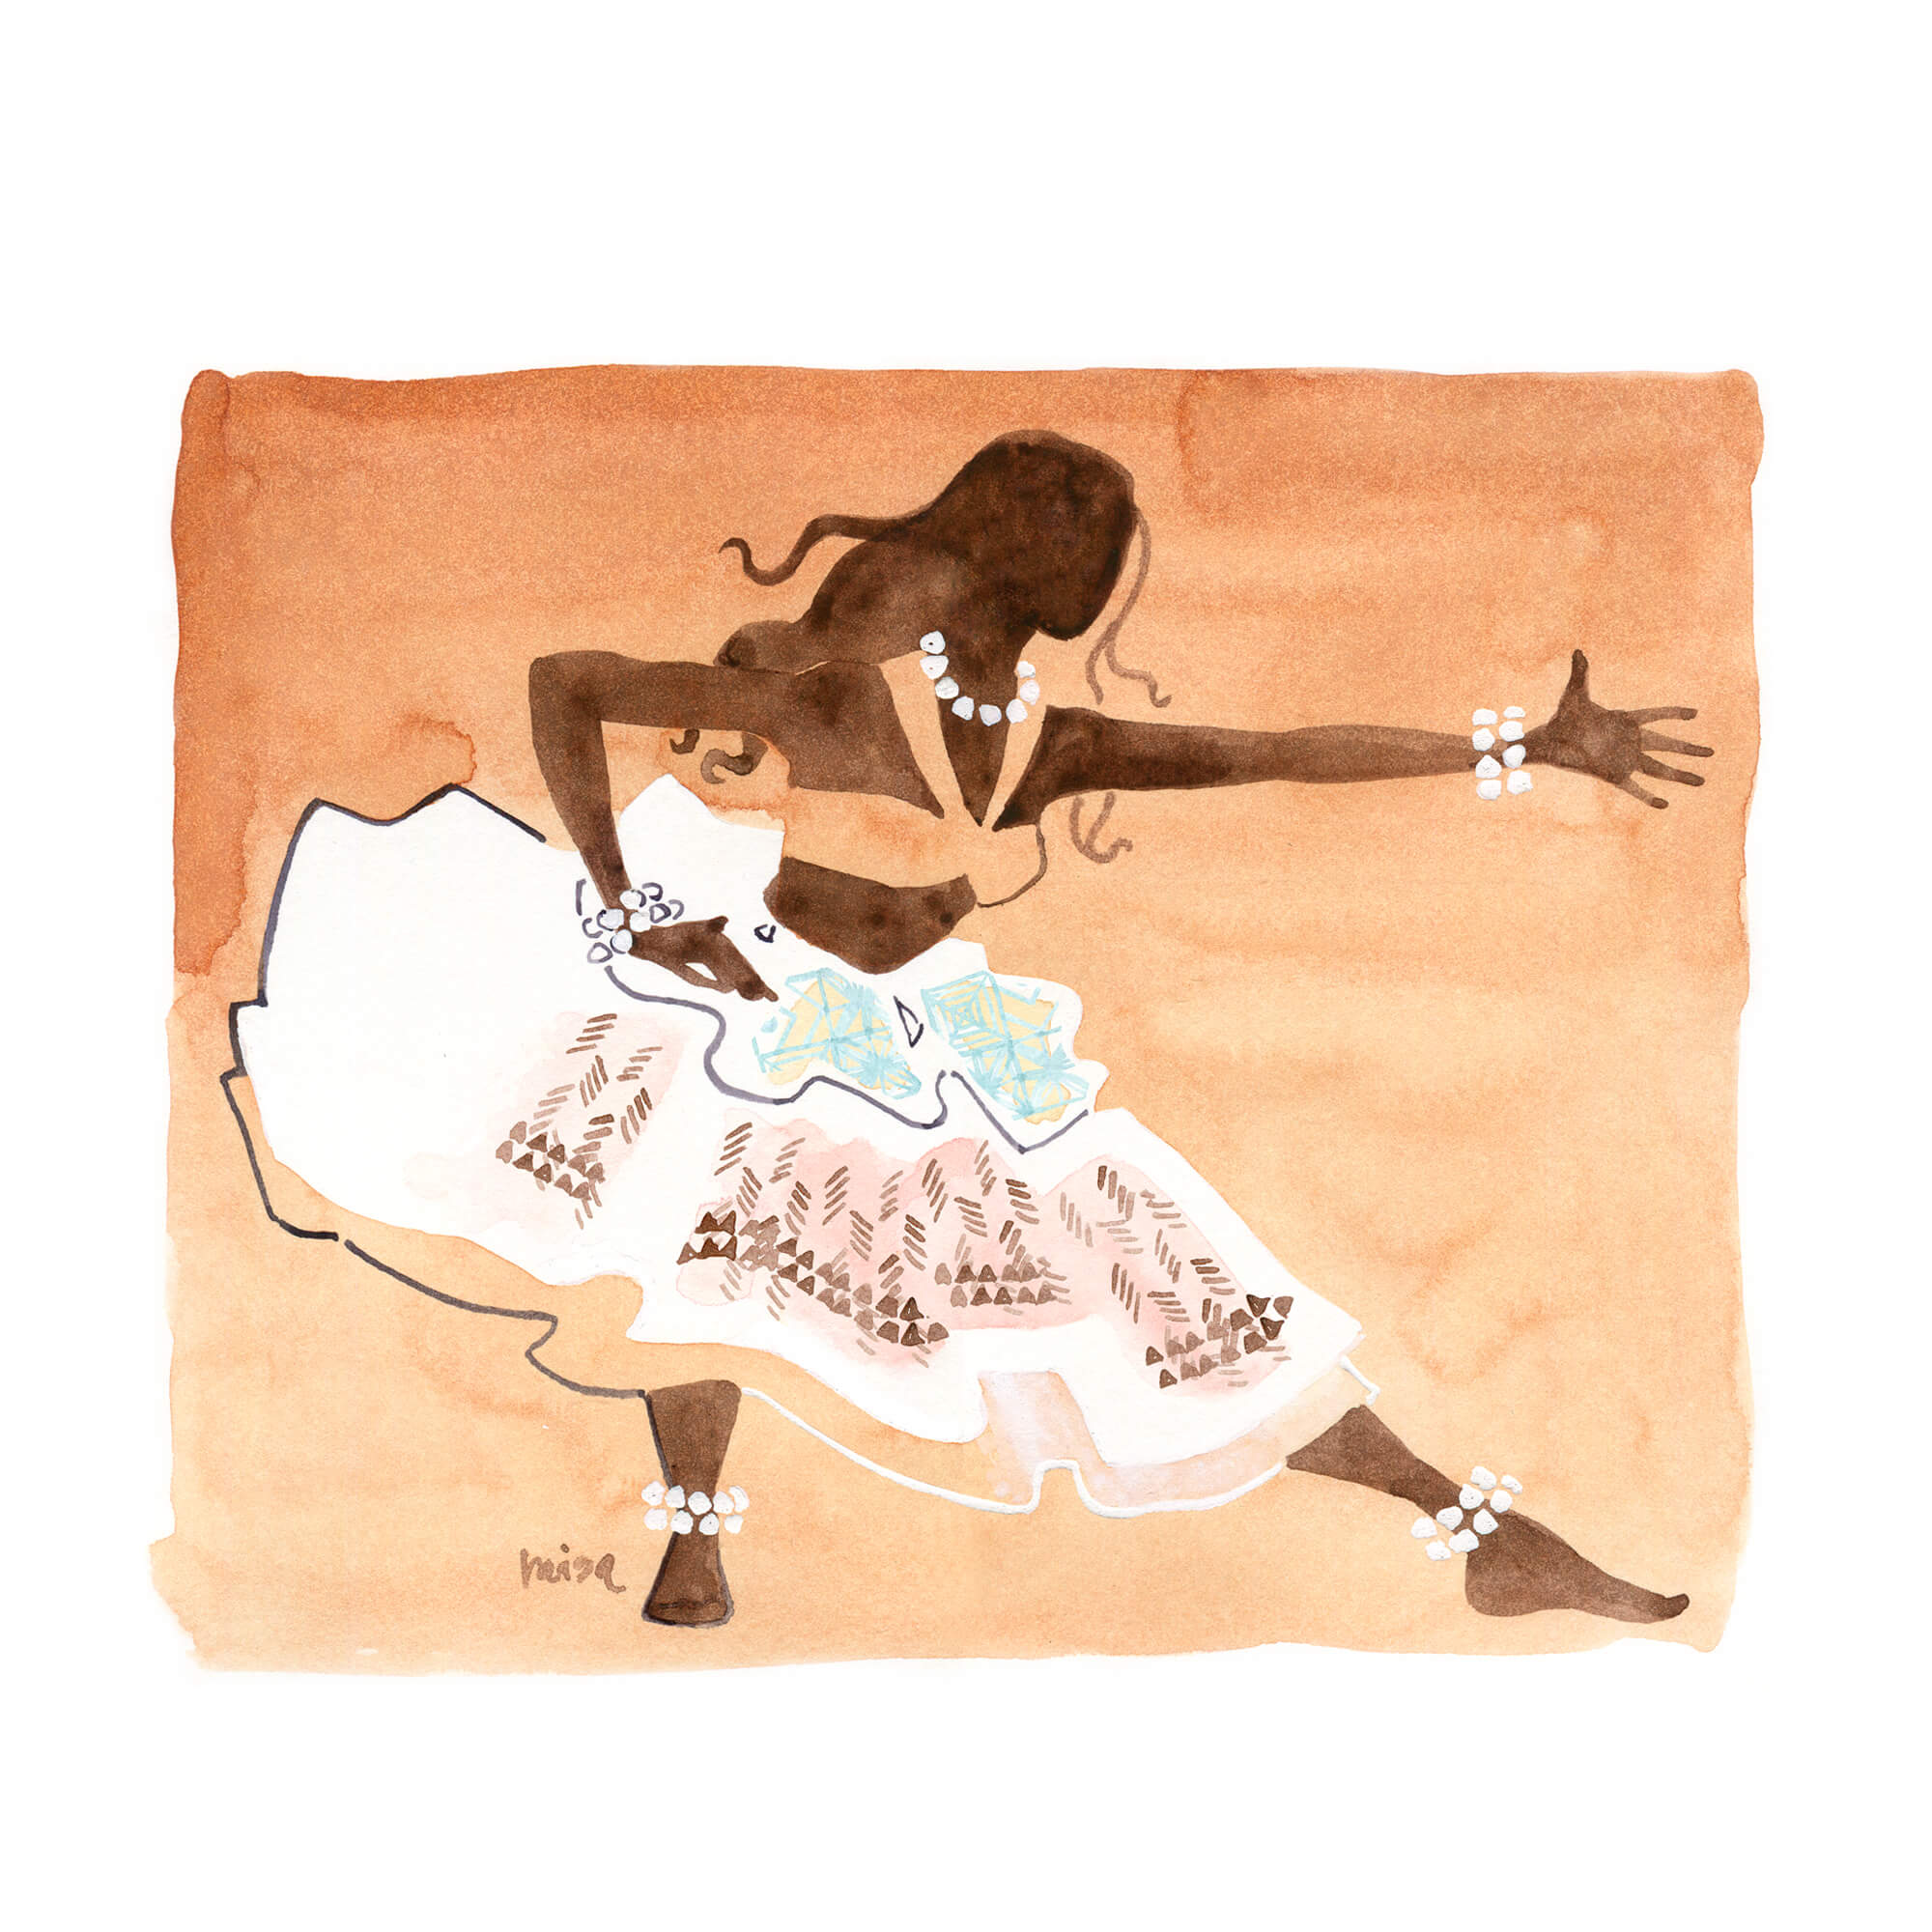 A paper giclée print of a watercolor artwork featuring a hula dancer on a sandy brown background by Hawaii artist Lovisa Oliv